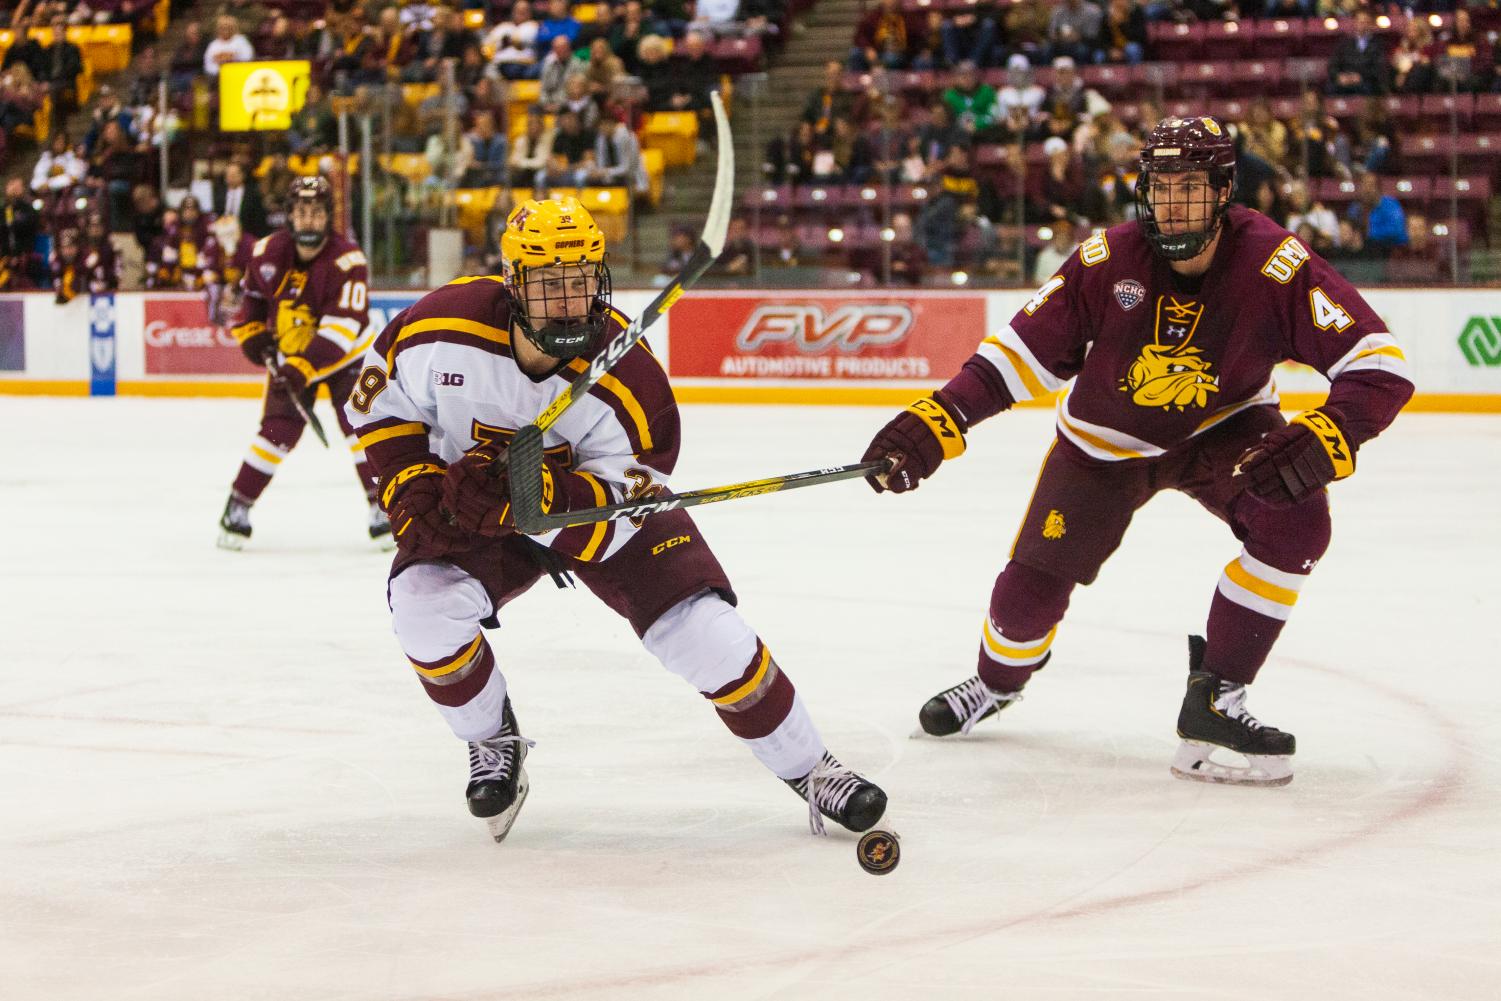 Why Gopher men's hockey matters so much to Minnesota — and why it may never  again be what it once was